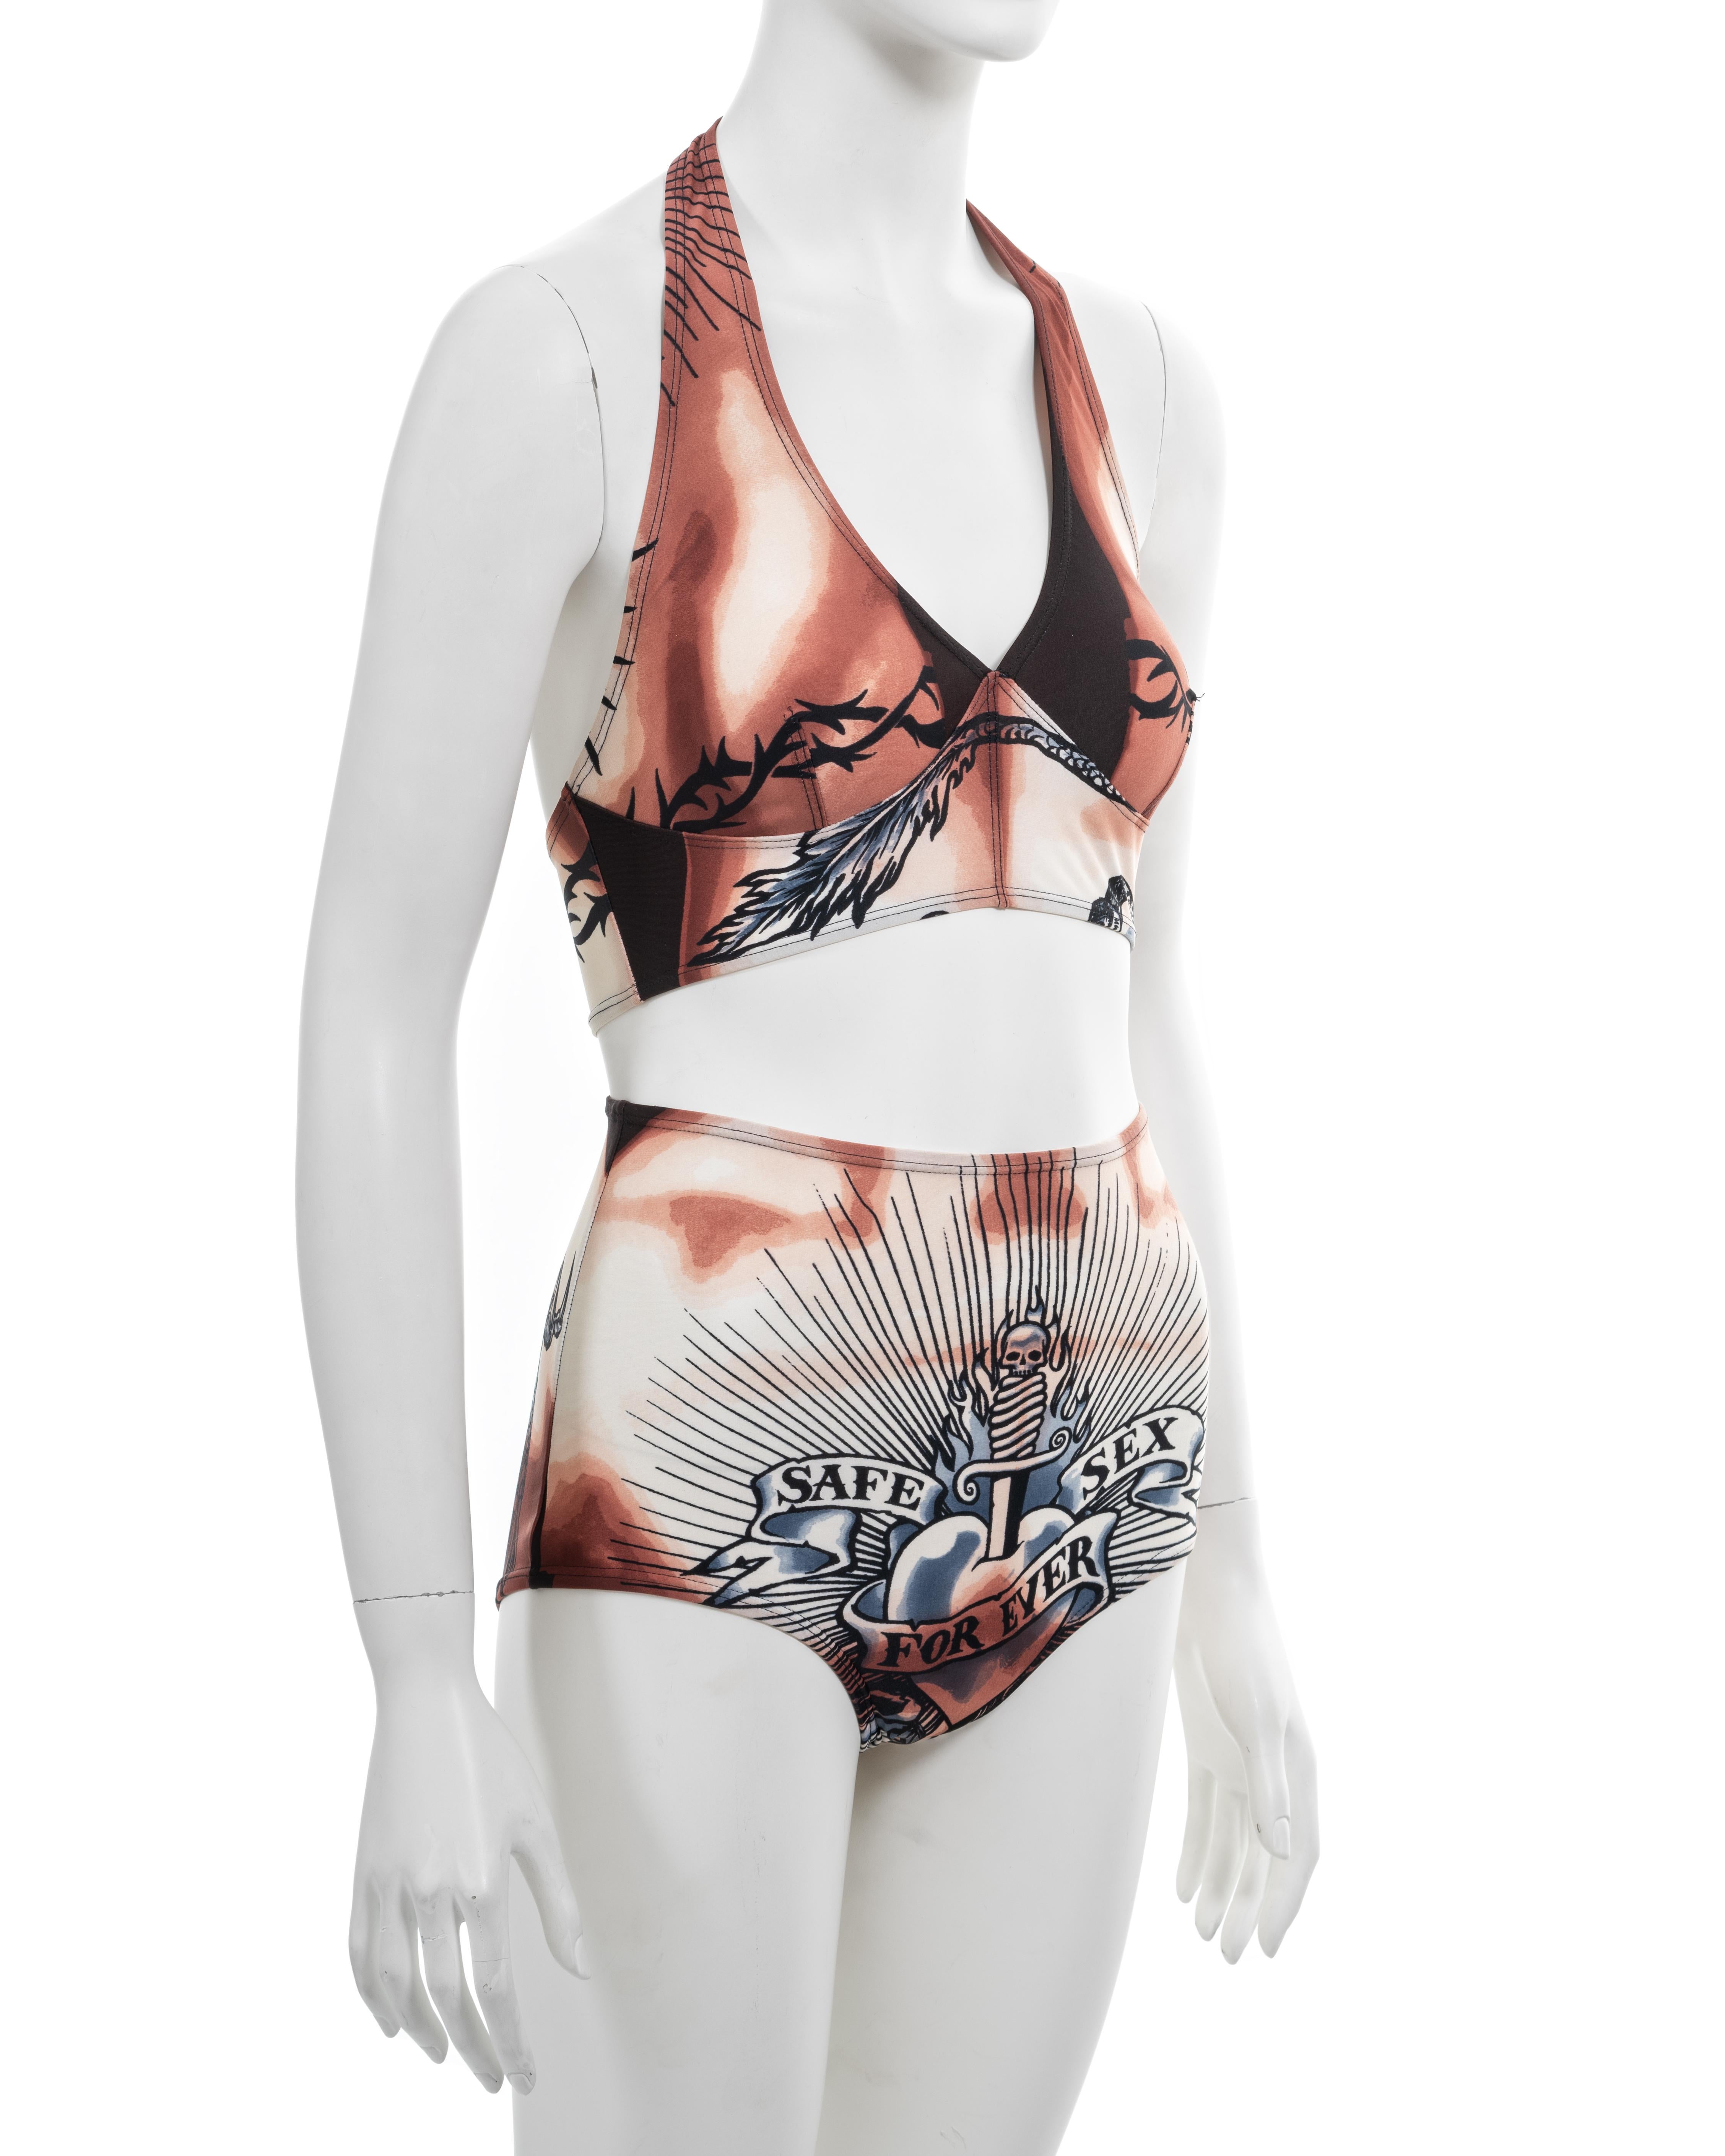 Jean Paul Gaultier 'Safe Sex Forever' tattoo print 2 piece set, ss 1996 For Sale 2